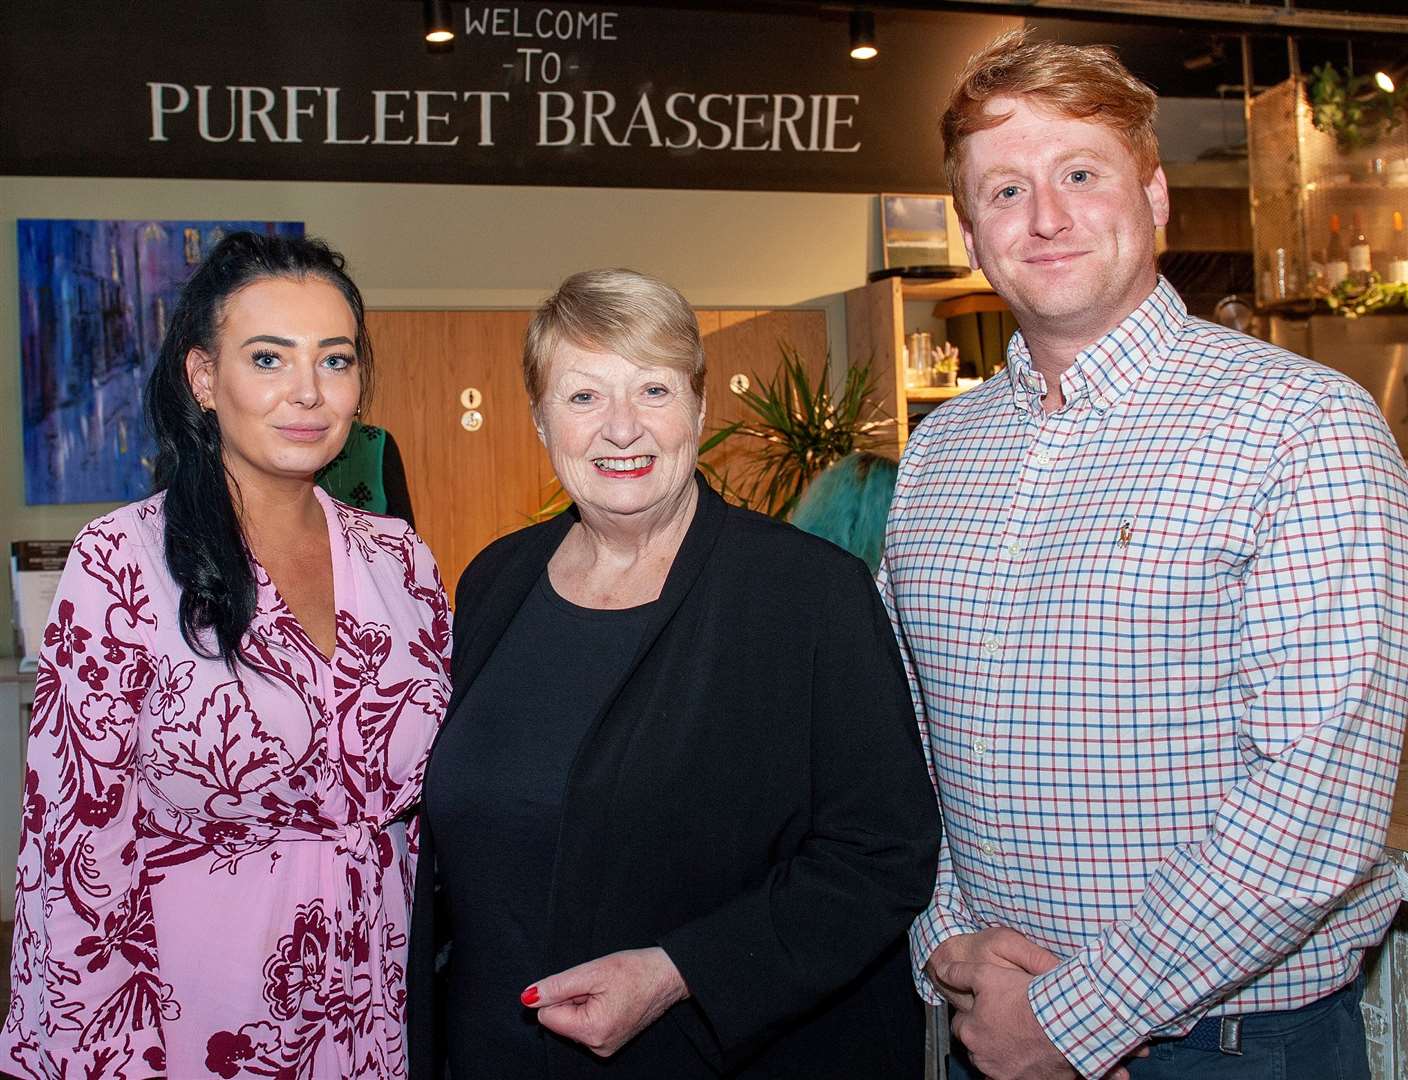 At the Purfleet Brasserie opening